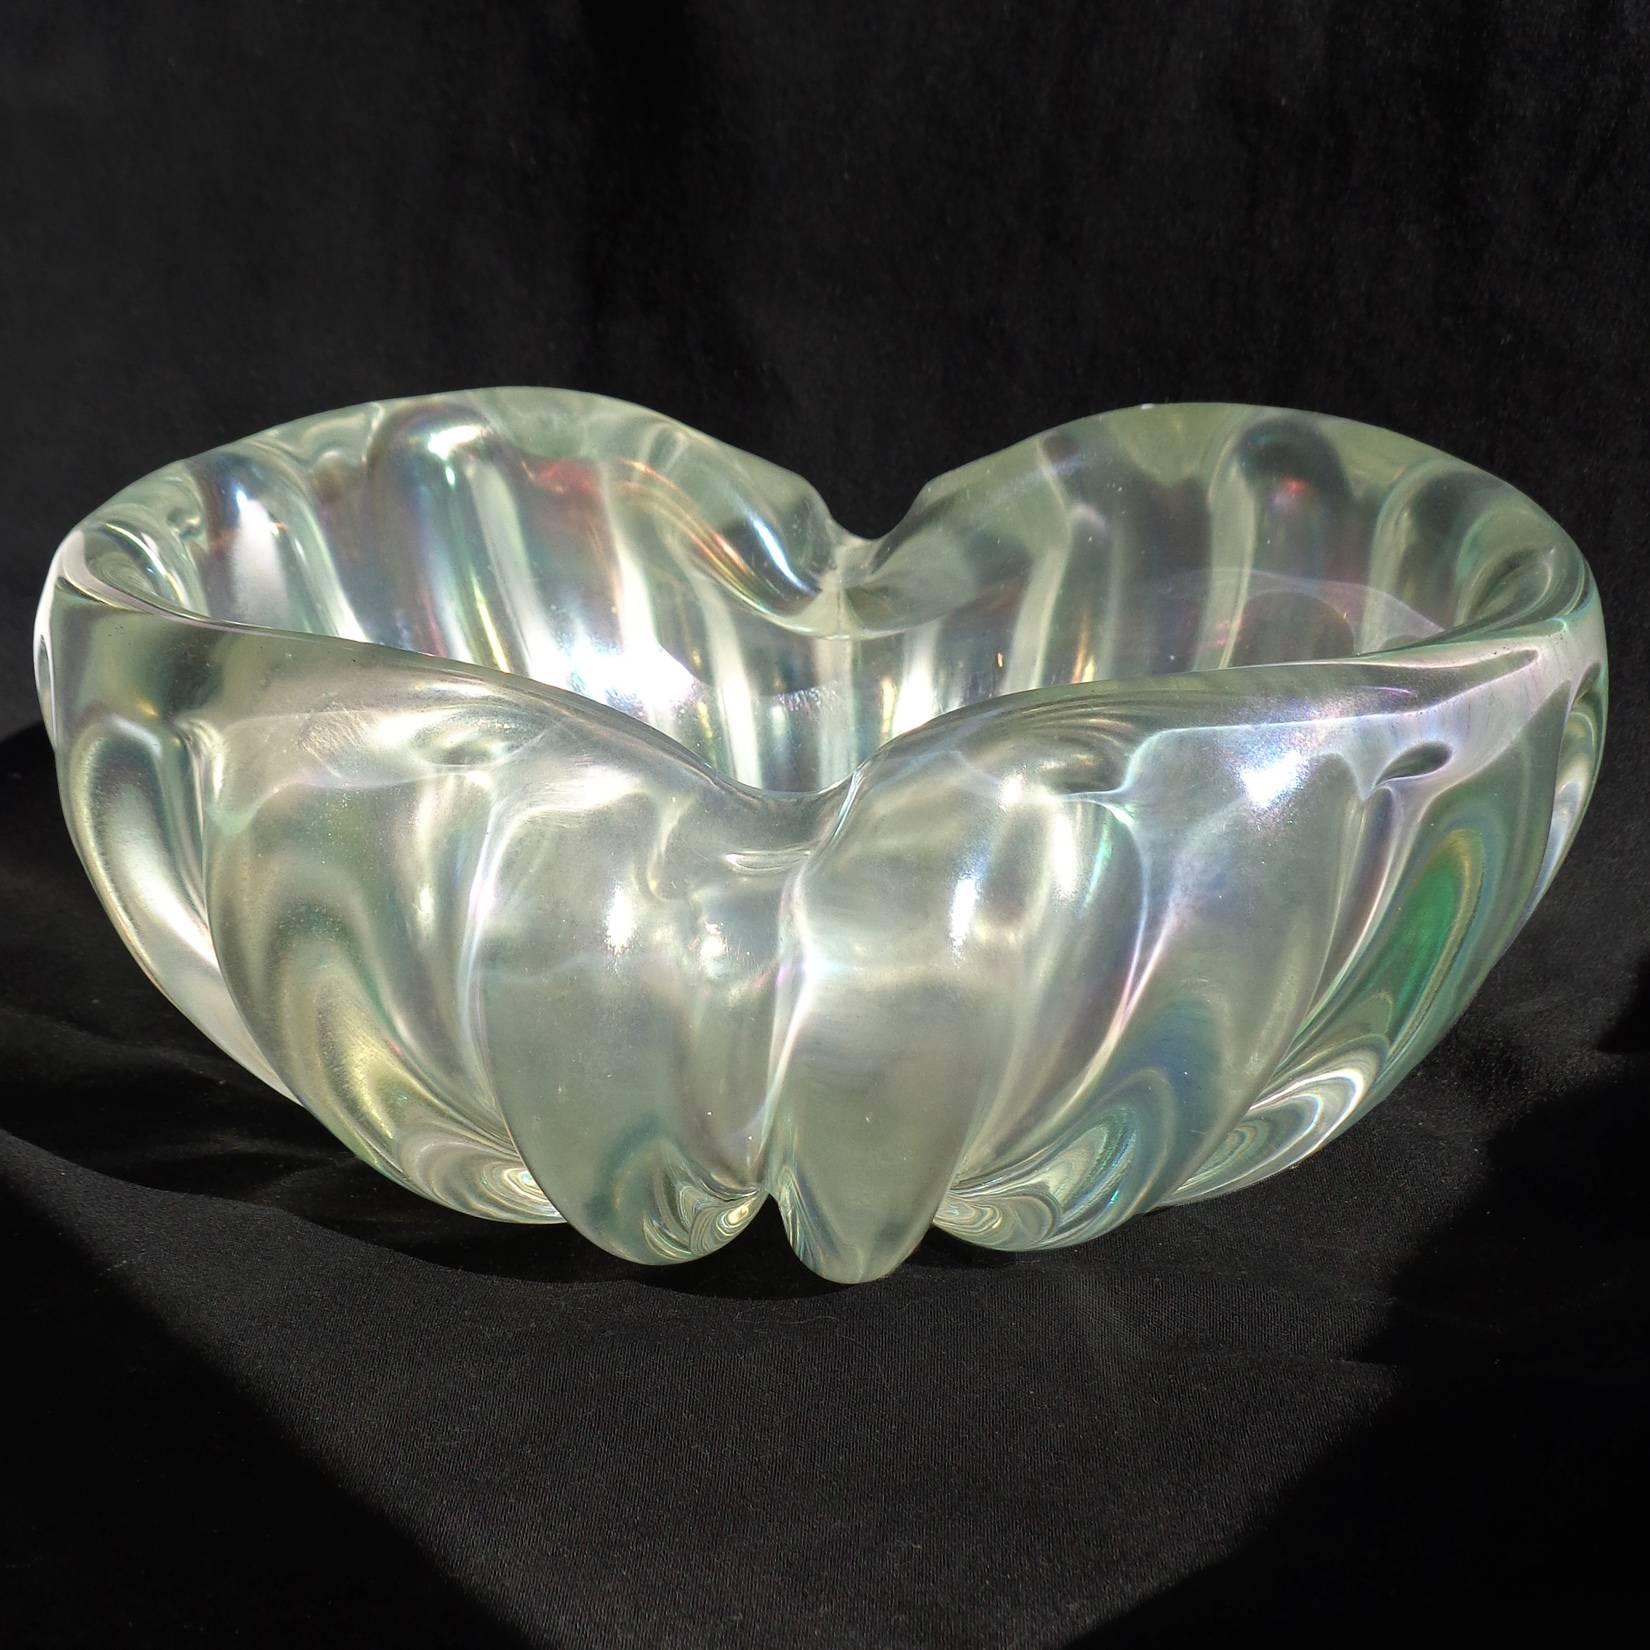 Beautiful, elegant, vintage Murano hand blown clear and iridescent / aurene Italian art glass bowl. Documented to the Barovier e Toso company. The piece is made with thick glass, and shows a rainbow of colors when the light hits, from the iridescent